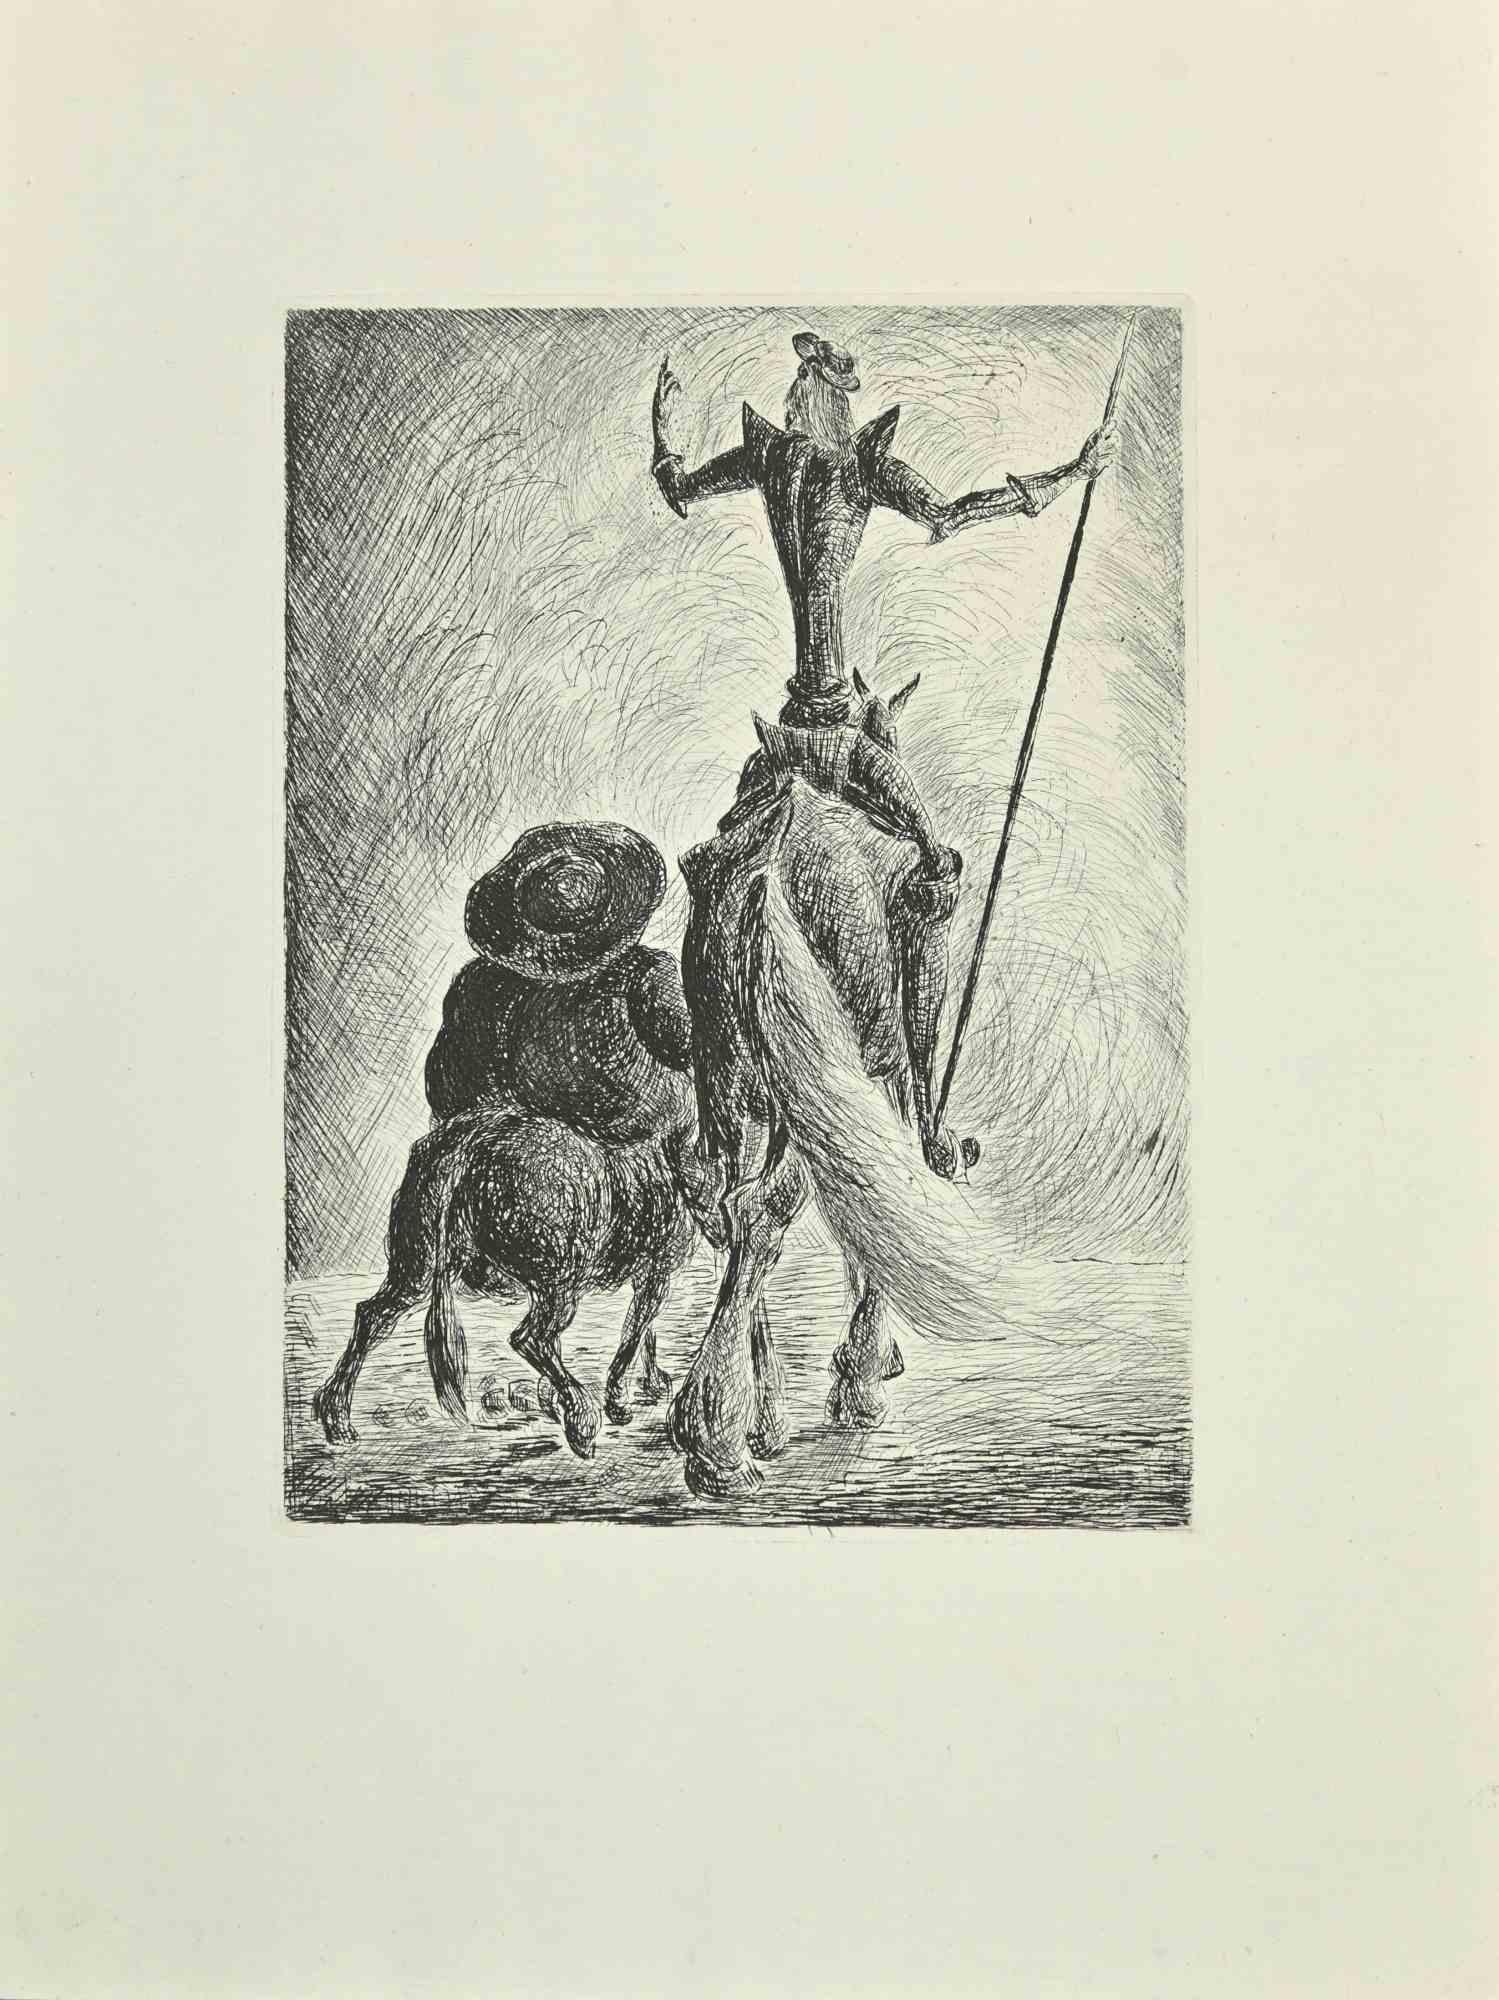 Don Quixote and Sancho Panza is an etching and drypoint print on ivory-colored China paper, realized by Wladyslaw Jahl in 1951.

It belongs to a limited edition of 125 specimens.

Good conditions.

The artwork represents a visual scene from Don